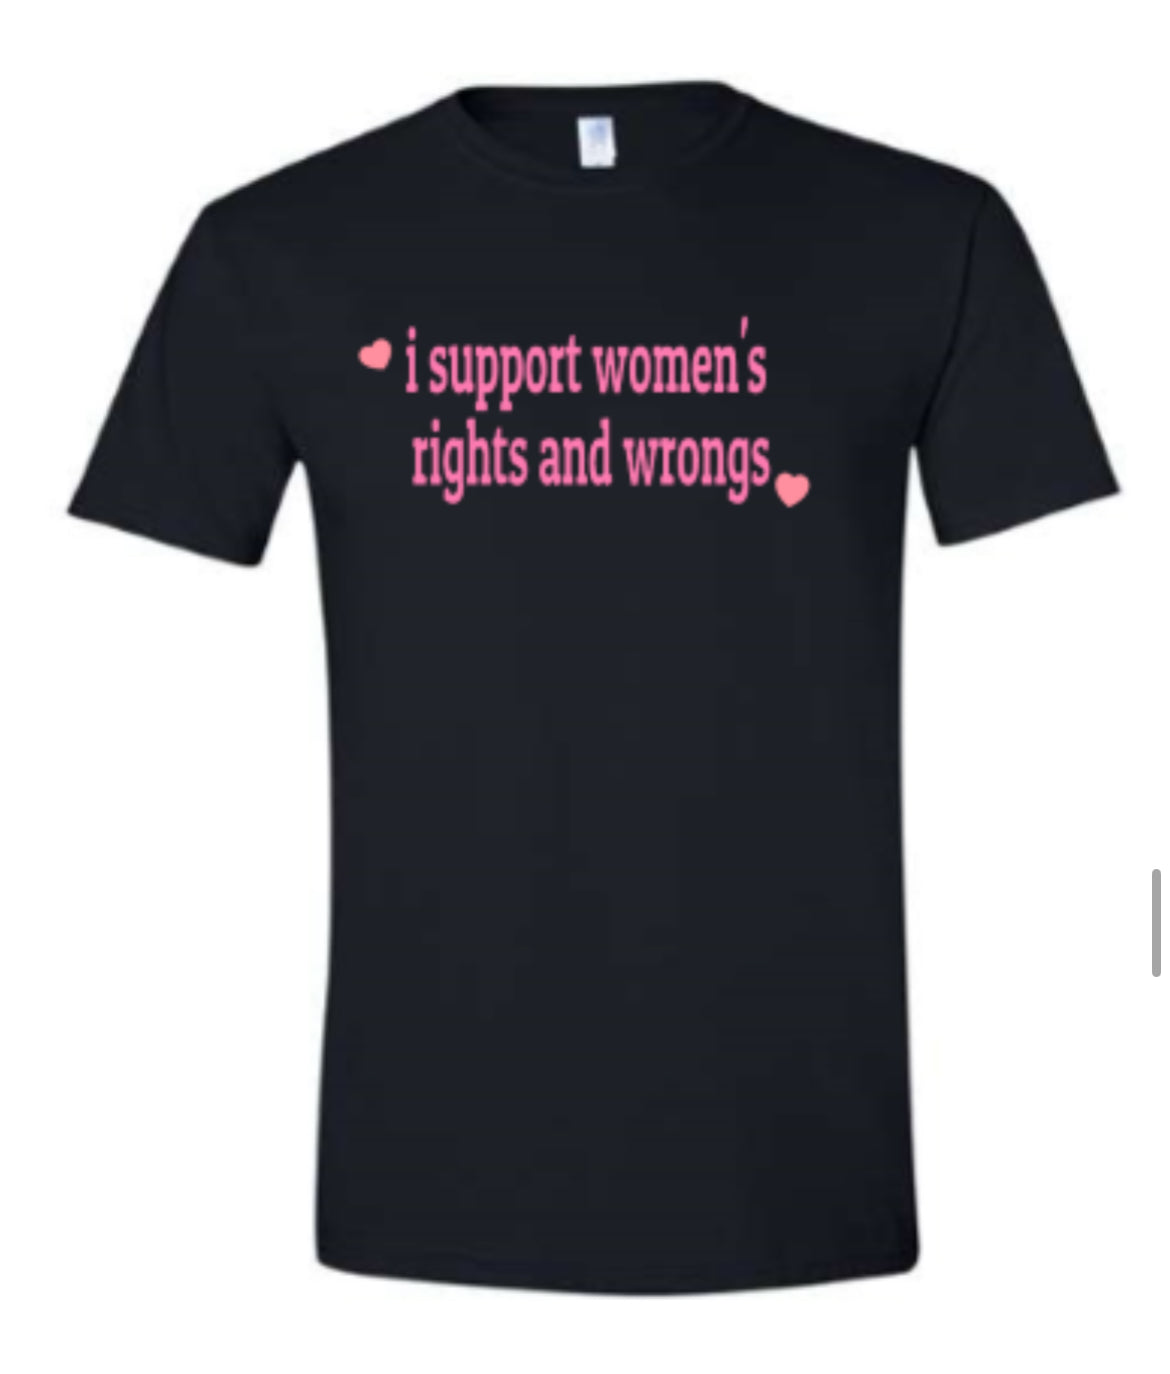 a t - shirt that says i support women's rights and wrongs